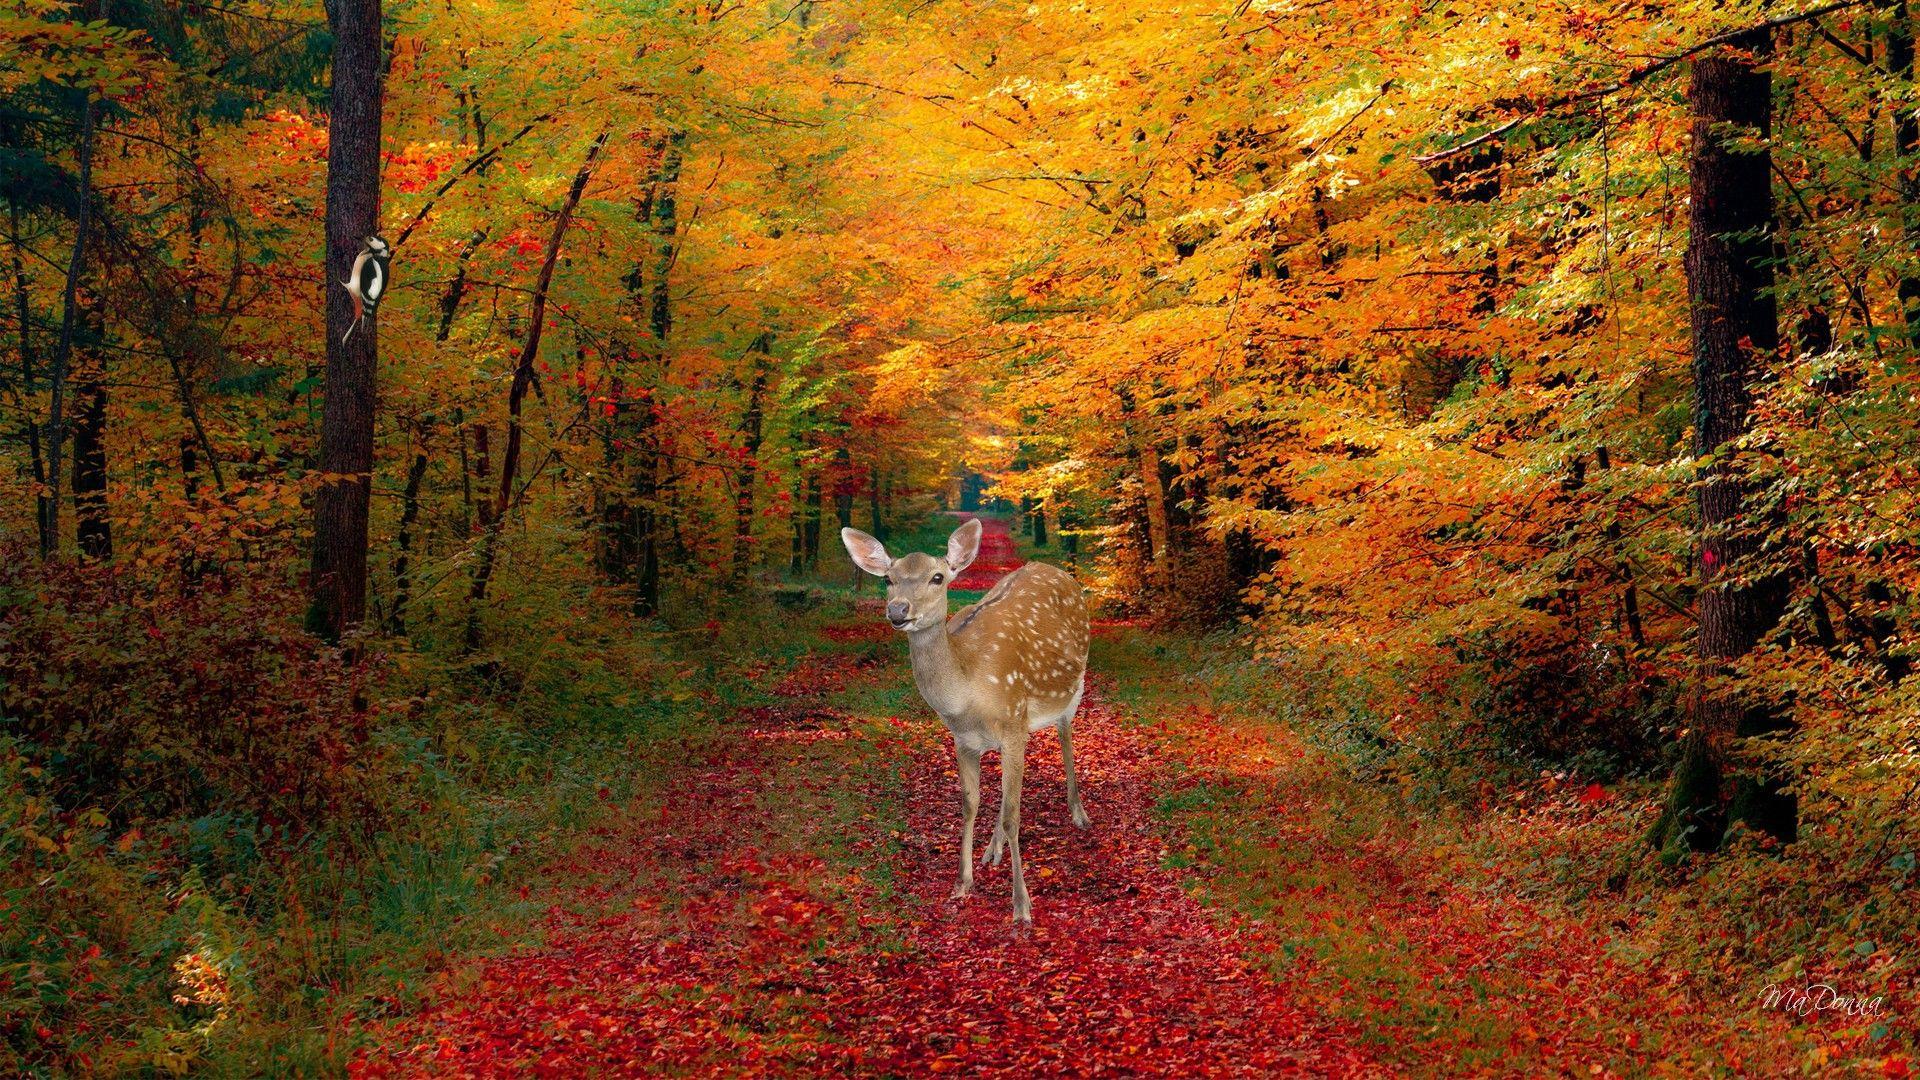 Deer In Autumn Desktop Background wallpaper HD free. Lost in the woods, Fall picture, Autumn leaves wallpaper